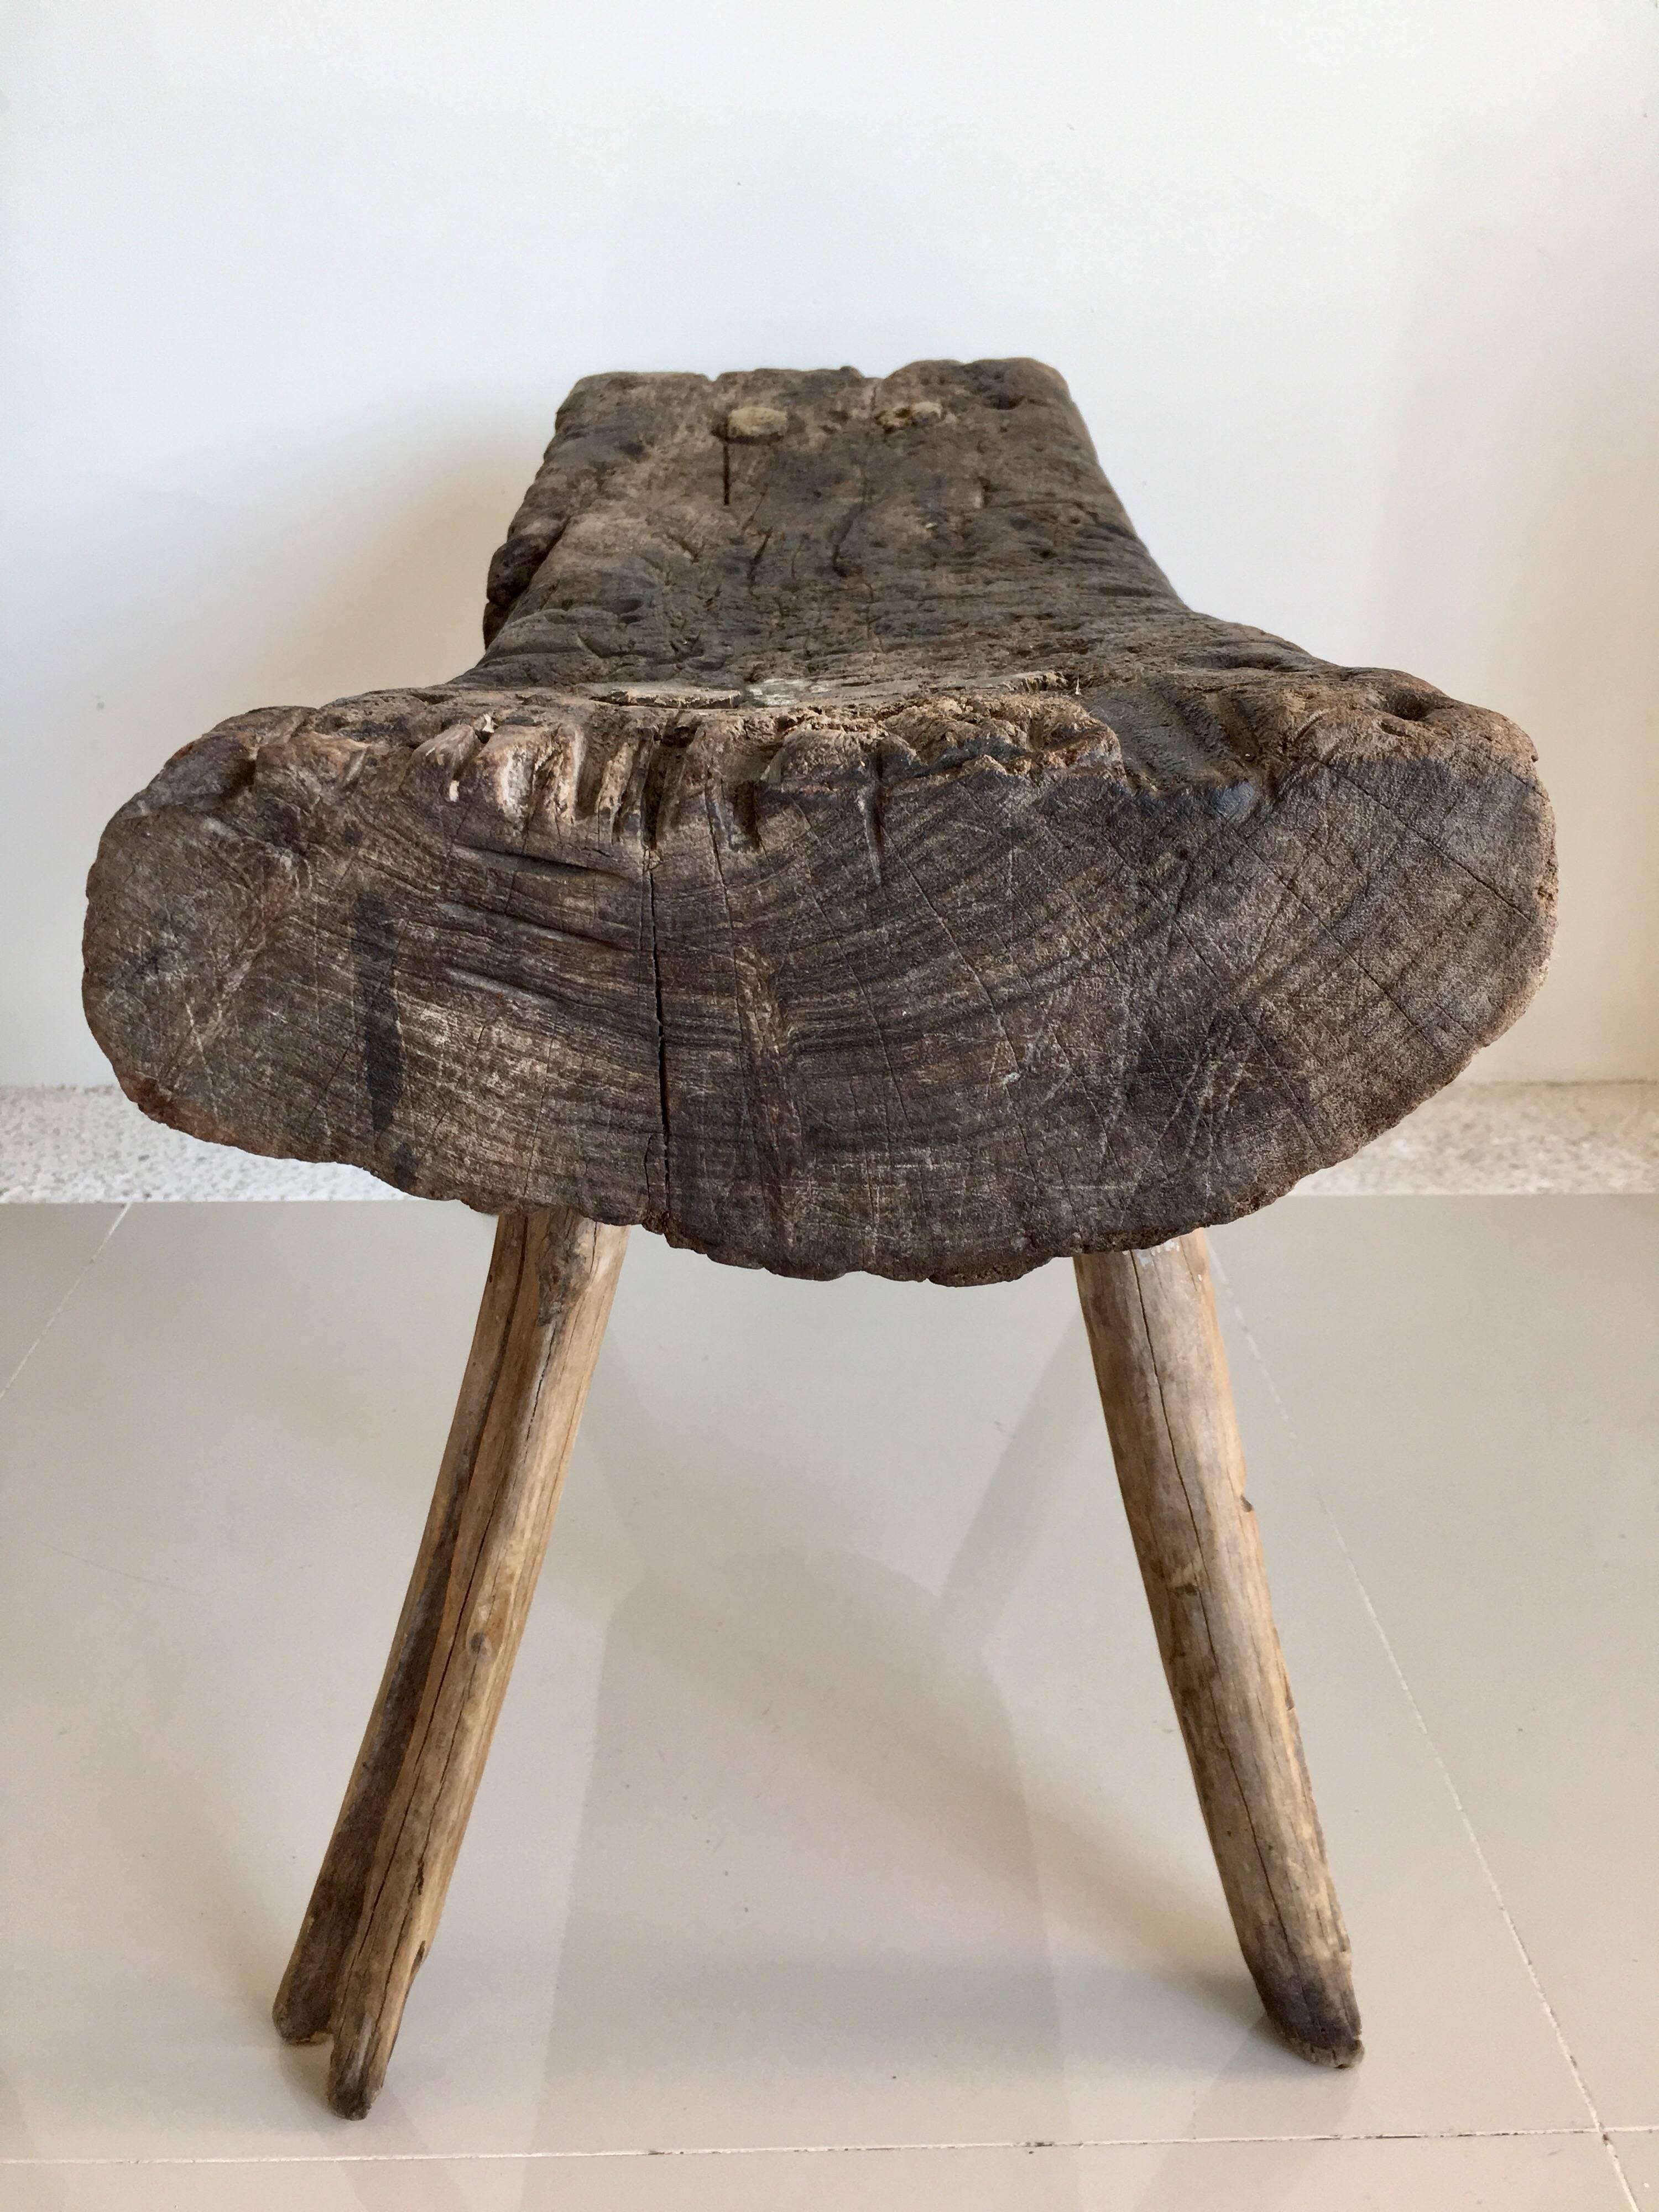 Primitive mesquite bench from the Guanajuato area of Mexico. One of a kind piece. Original legs. Heavily used most likely at a carpenter's shop. Wonderful patina.